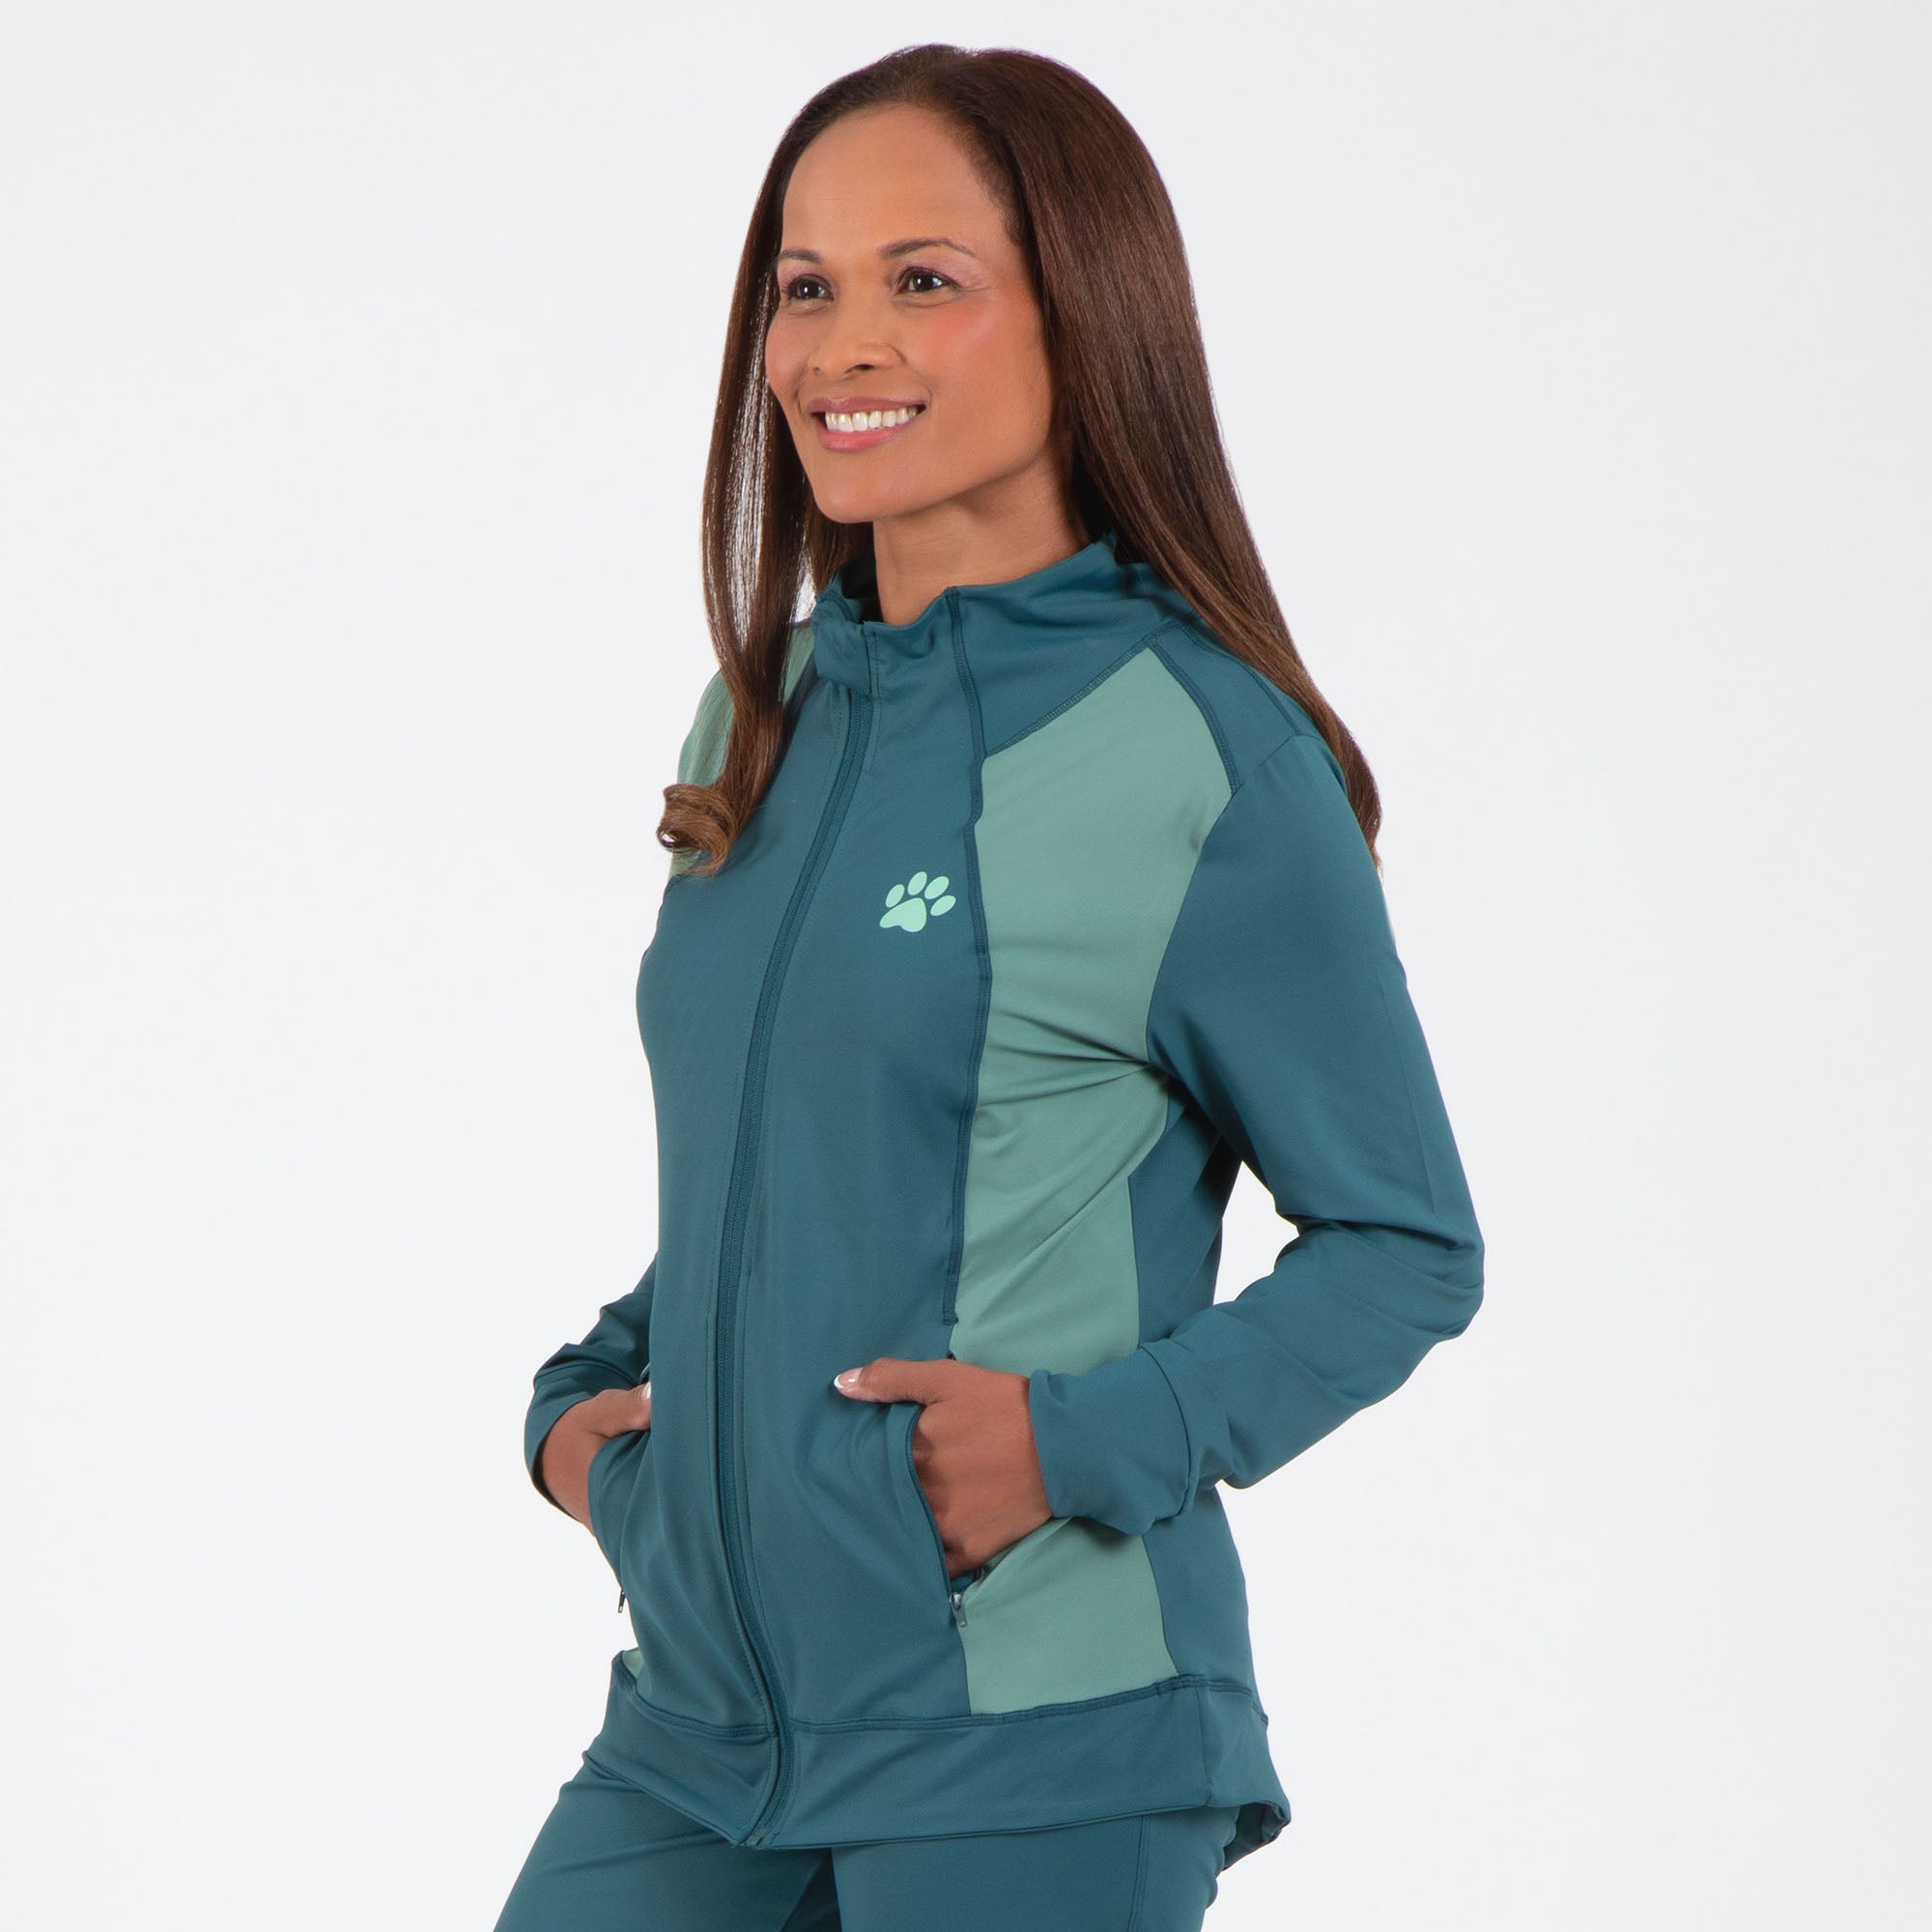 Yoga Paw Print Cross Over Separates - Teal - Jacket - 1X